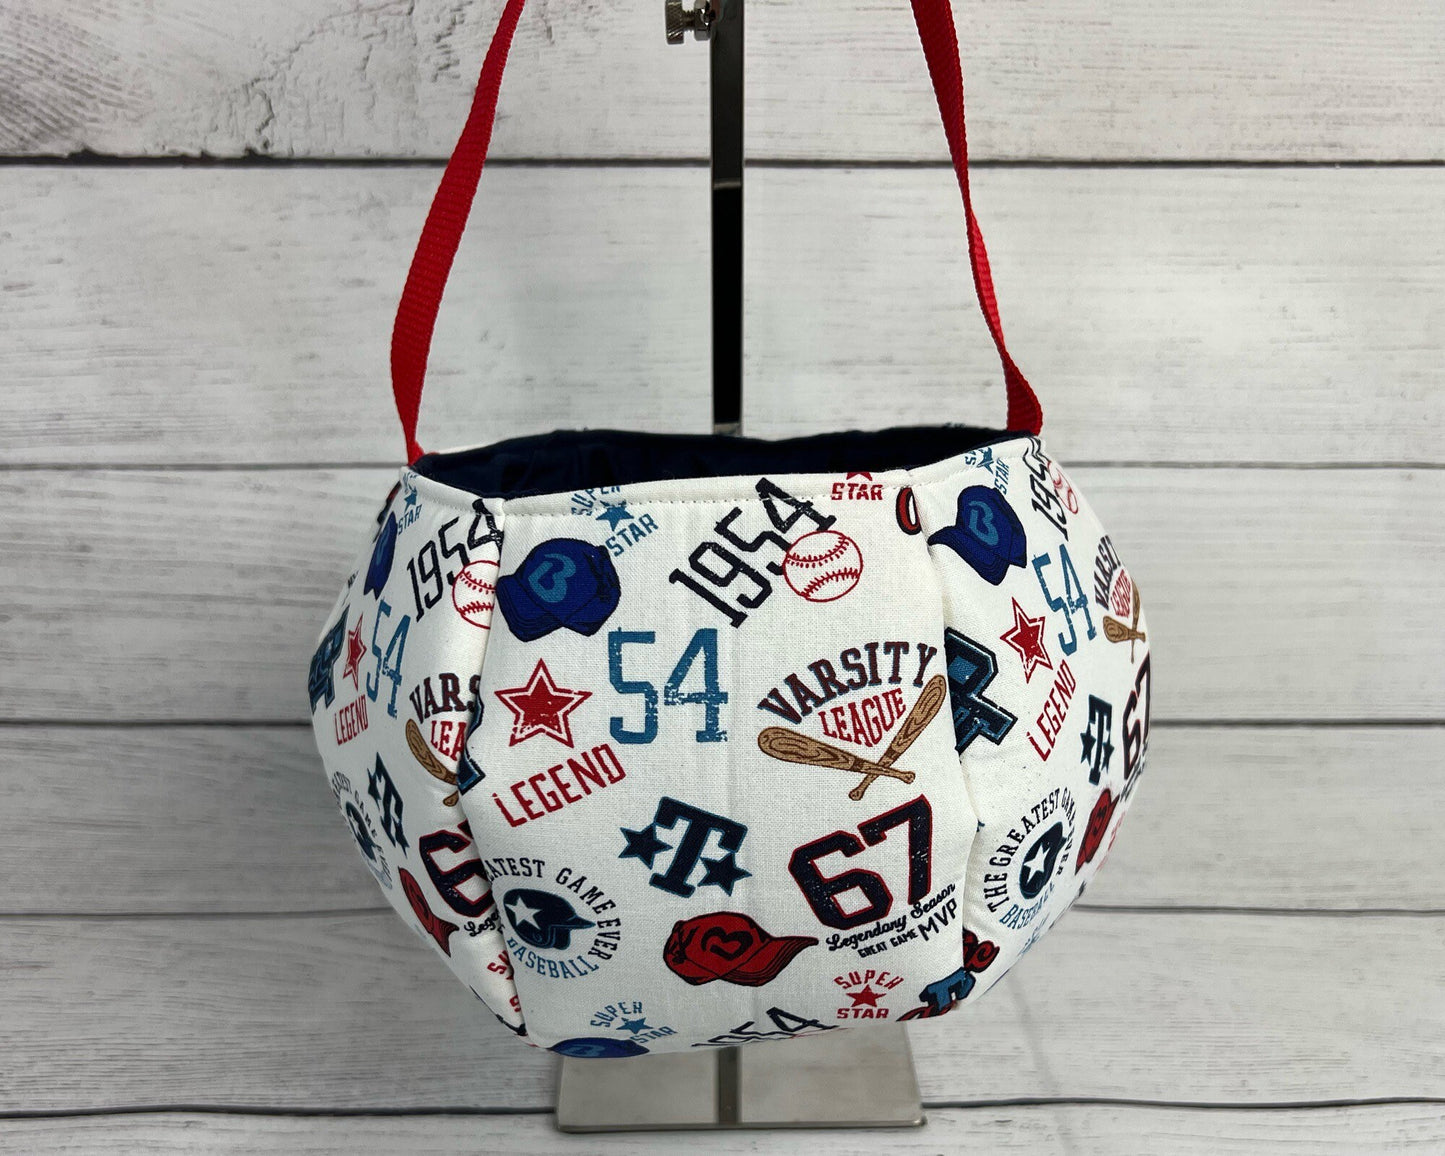 Baseball Themed Tote Bag - Baseball Glove - All Star - Fun - Multi-Colored - Everyday - Holiday - Easter - Halloween - Party - Gifts